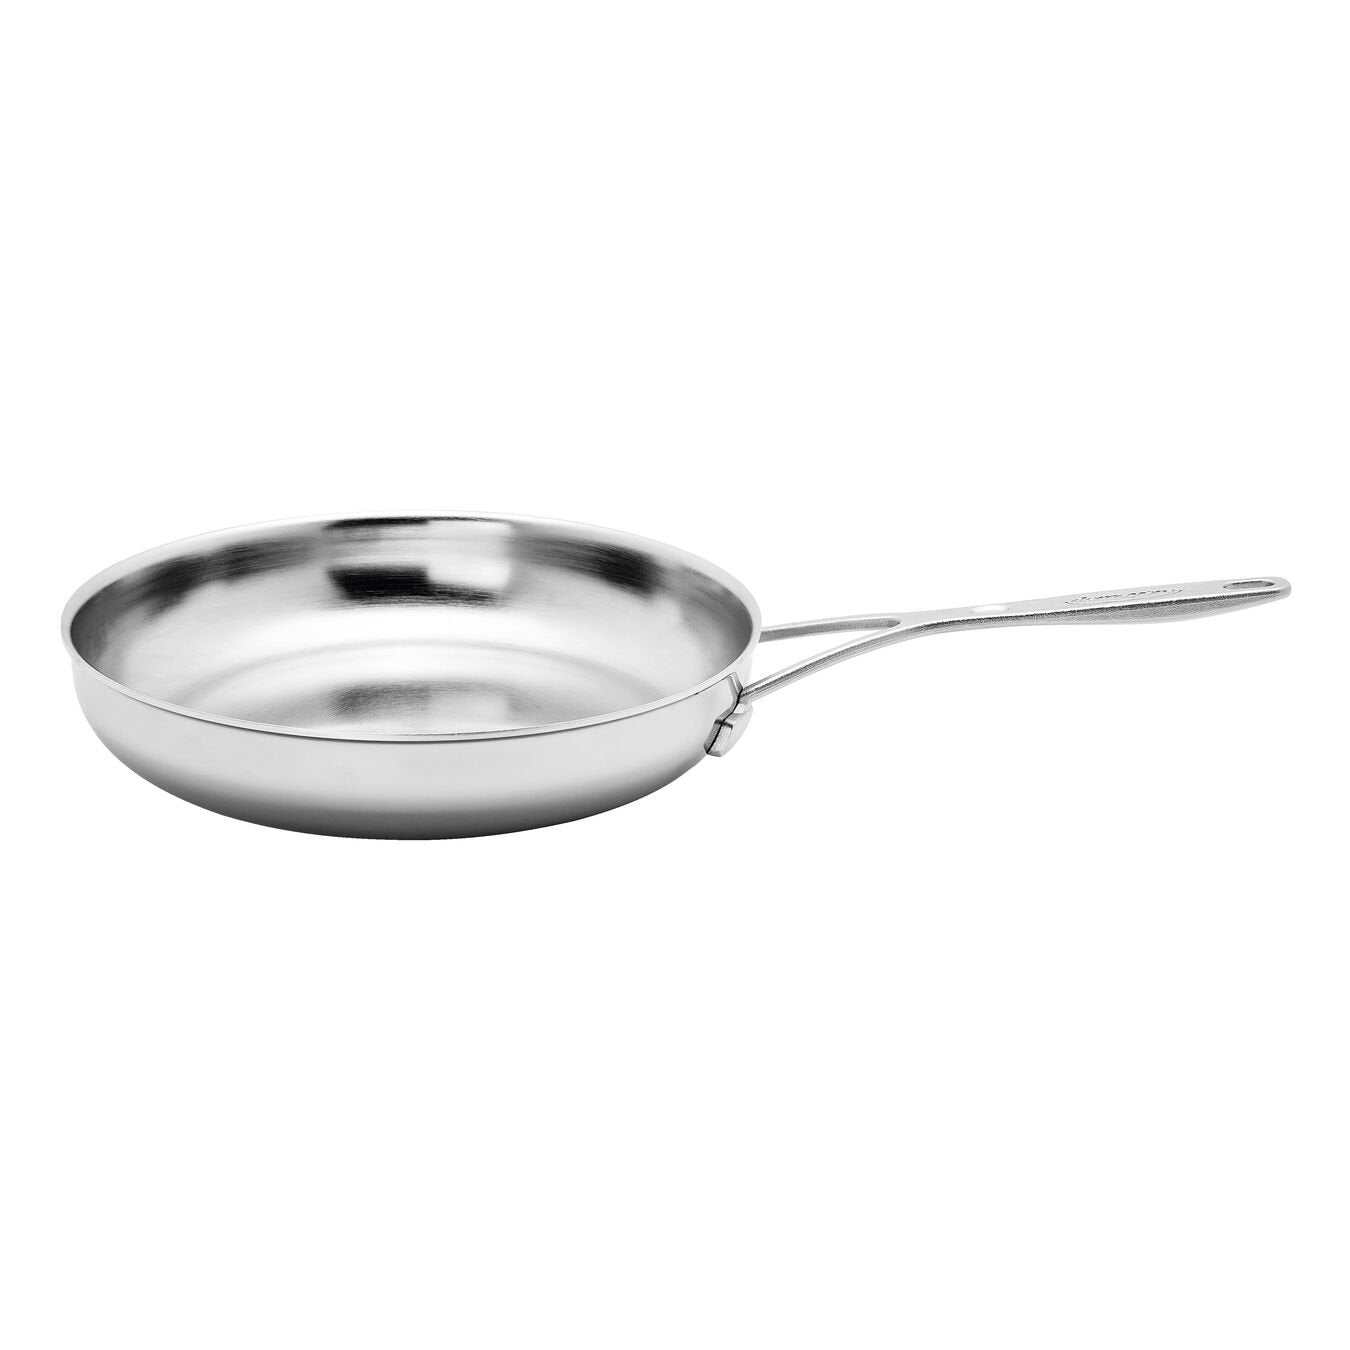 Demeyere 5-Plus 11 Stainless Steel Fry Pan with Glass Lid